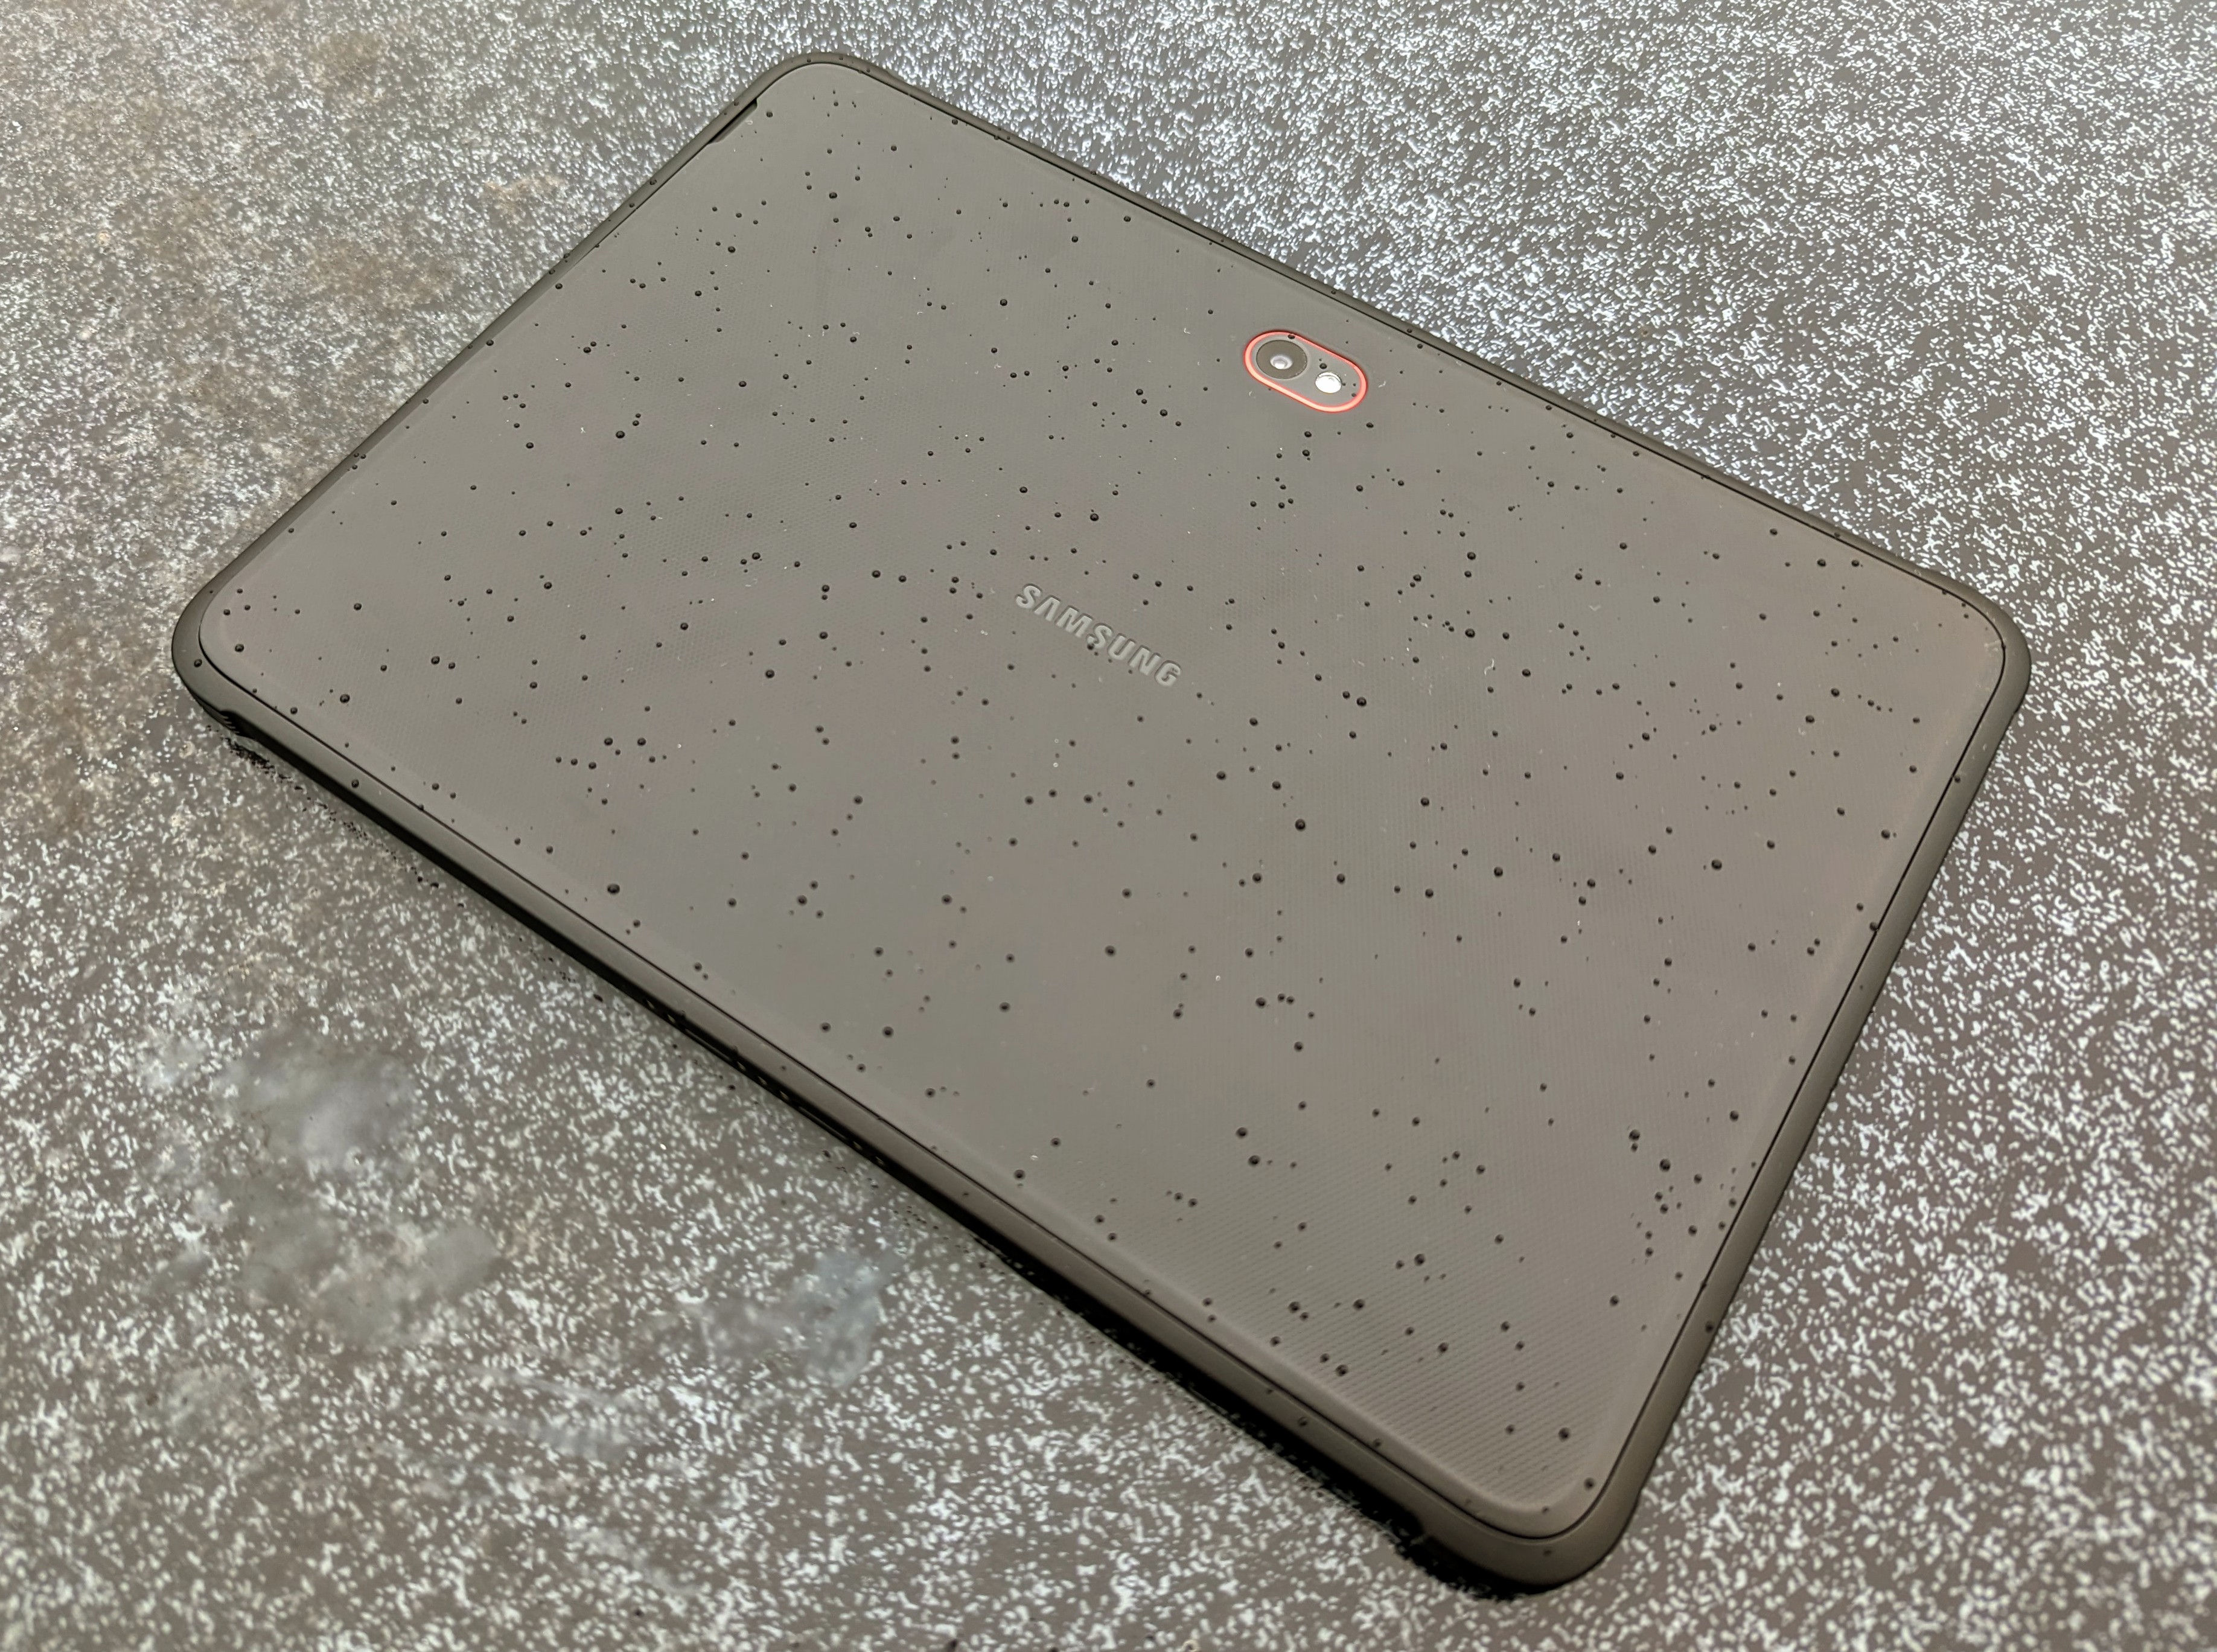 Samsung Galaxy Tab Active4 Pro review: Weatherproof tablet with ...